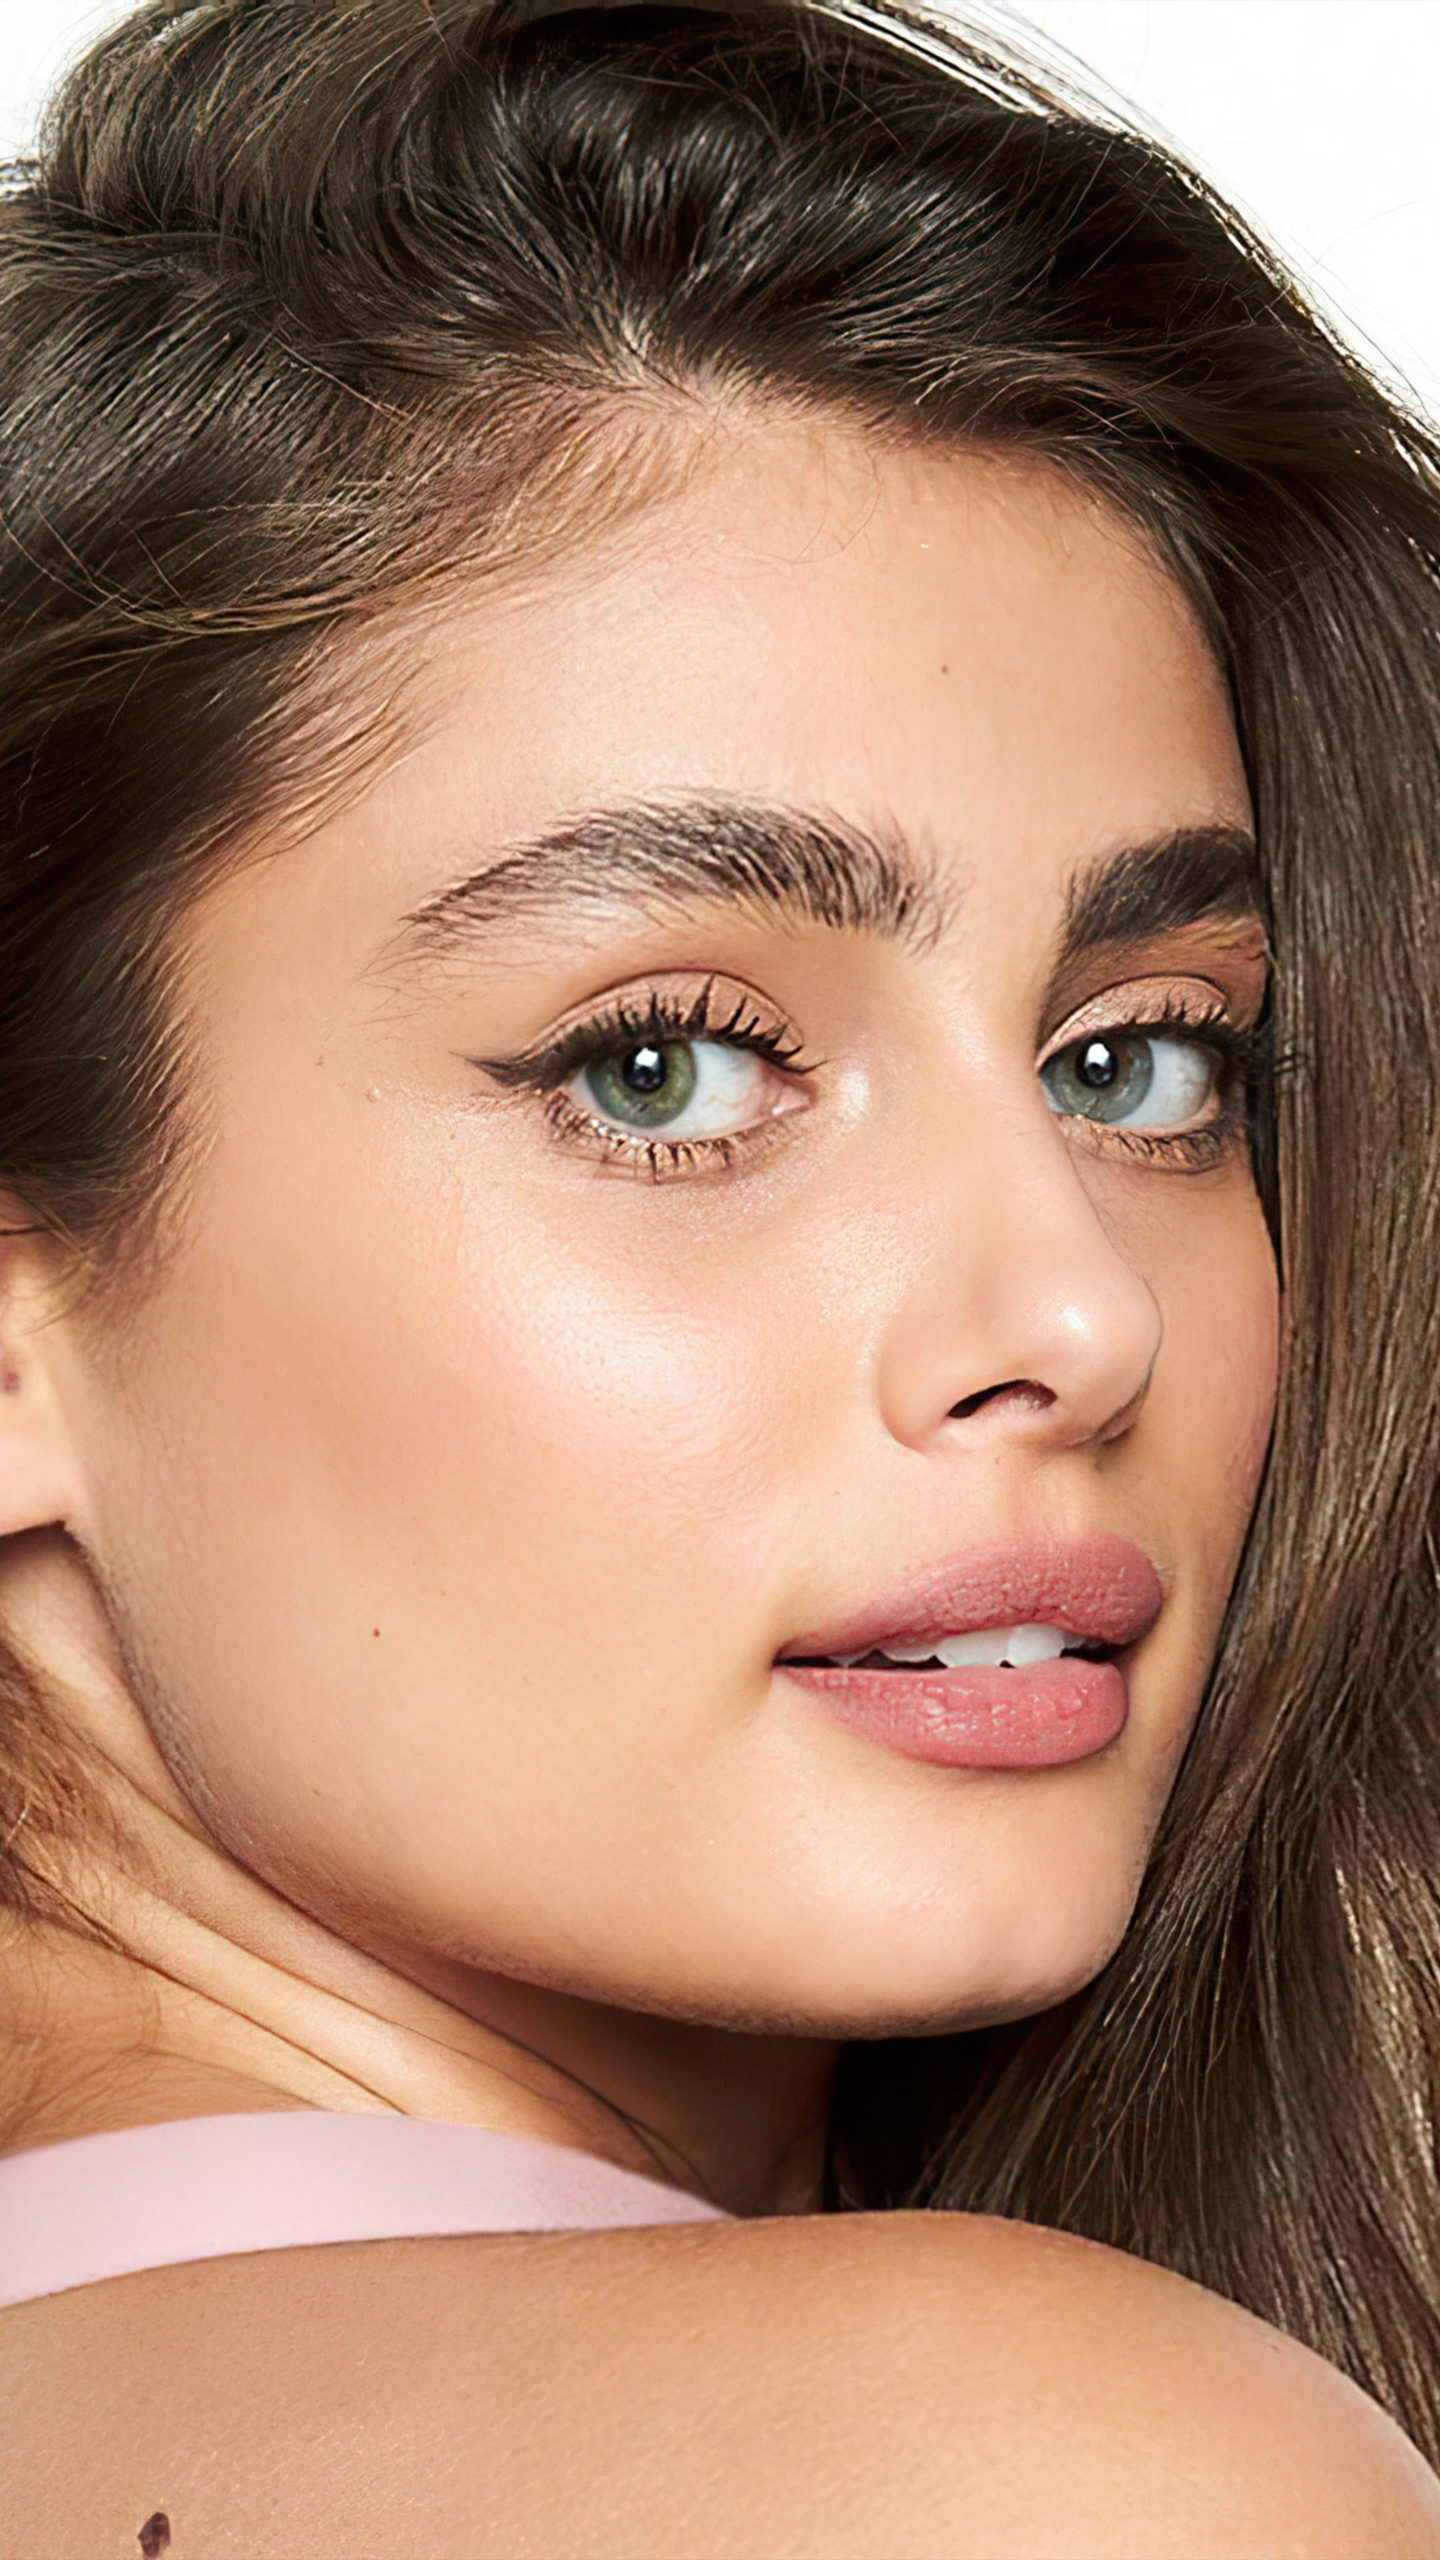 Taylor Hill Model 2020 Wallpapers